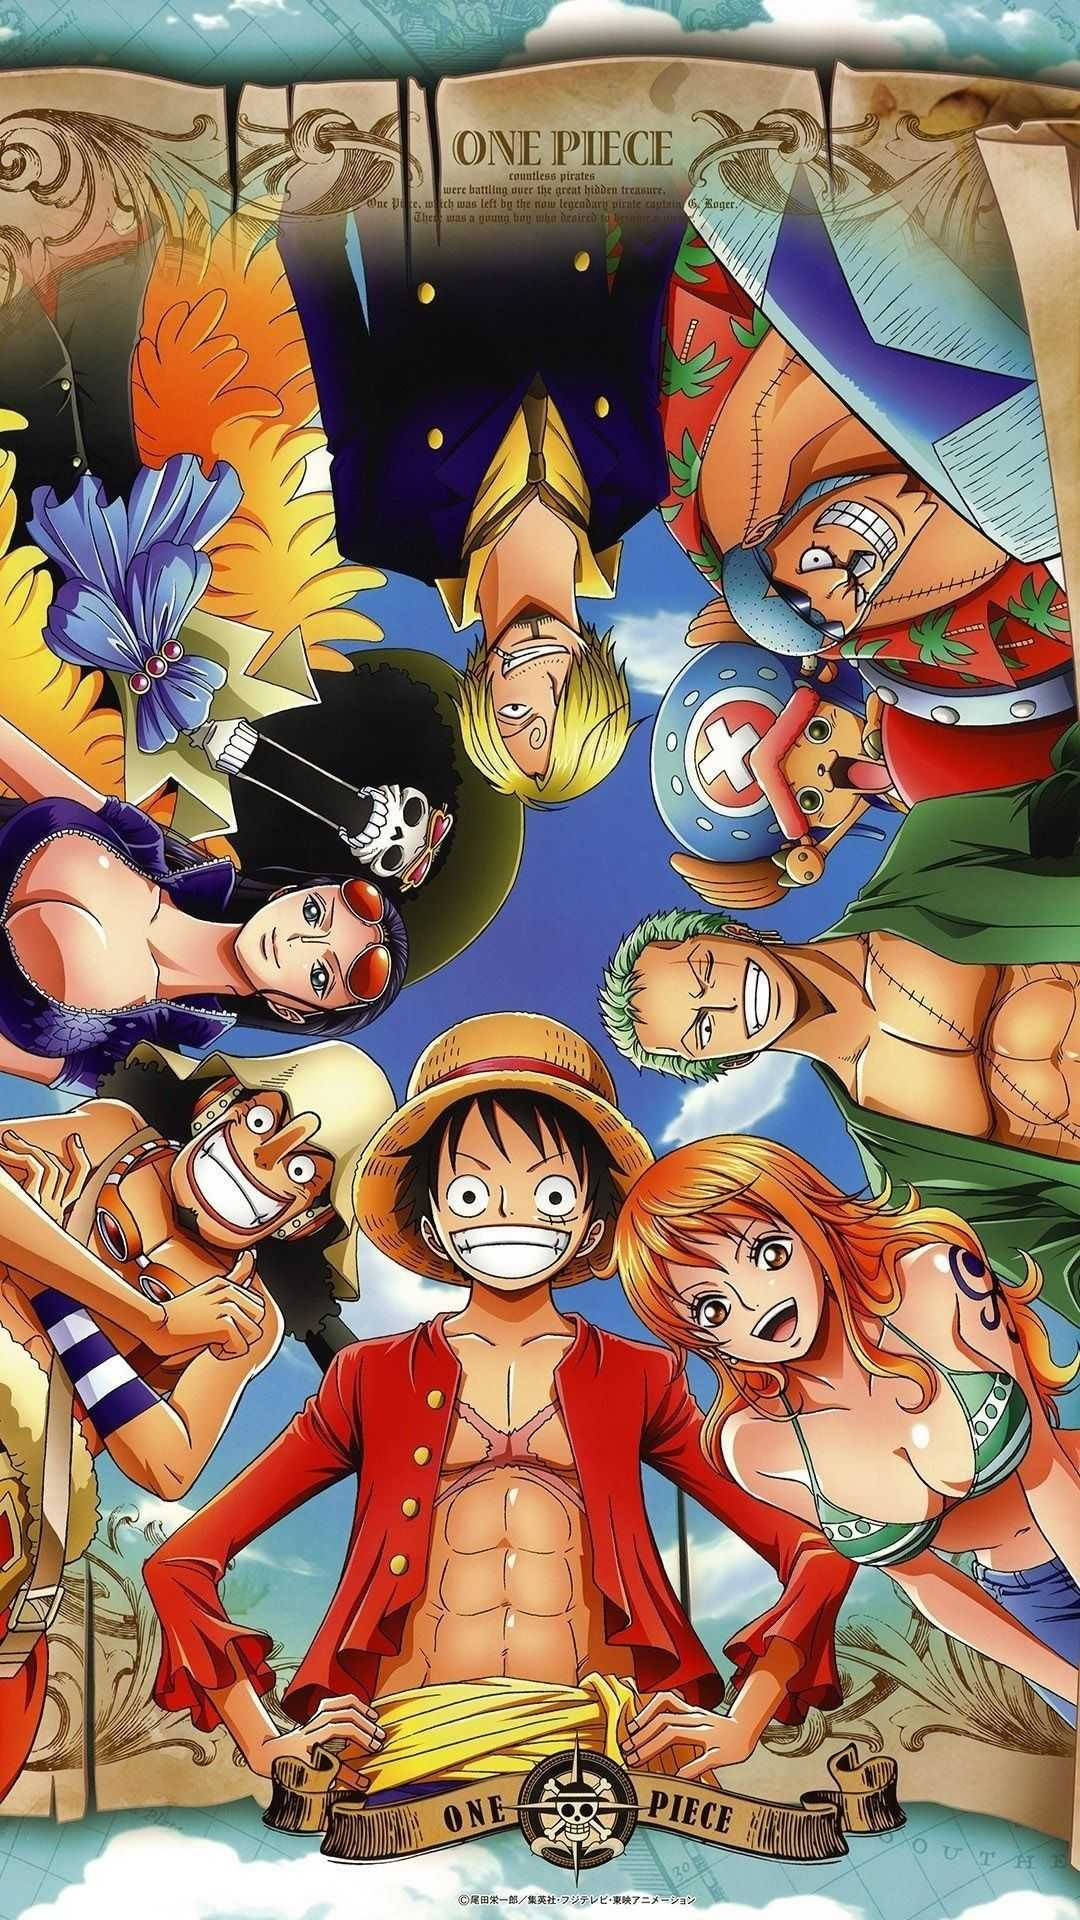 1080X1920 One Piece Iphone Wallpaper and Background